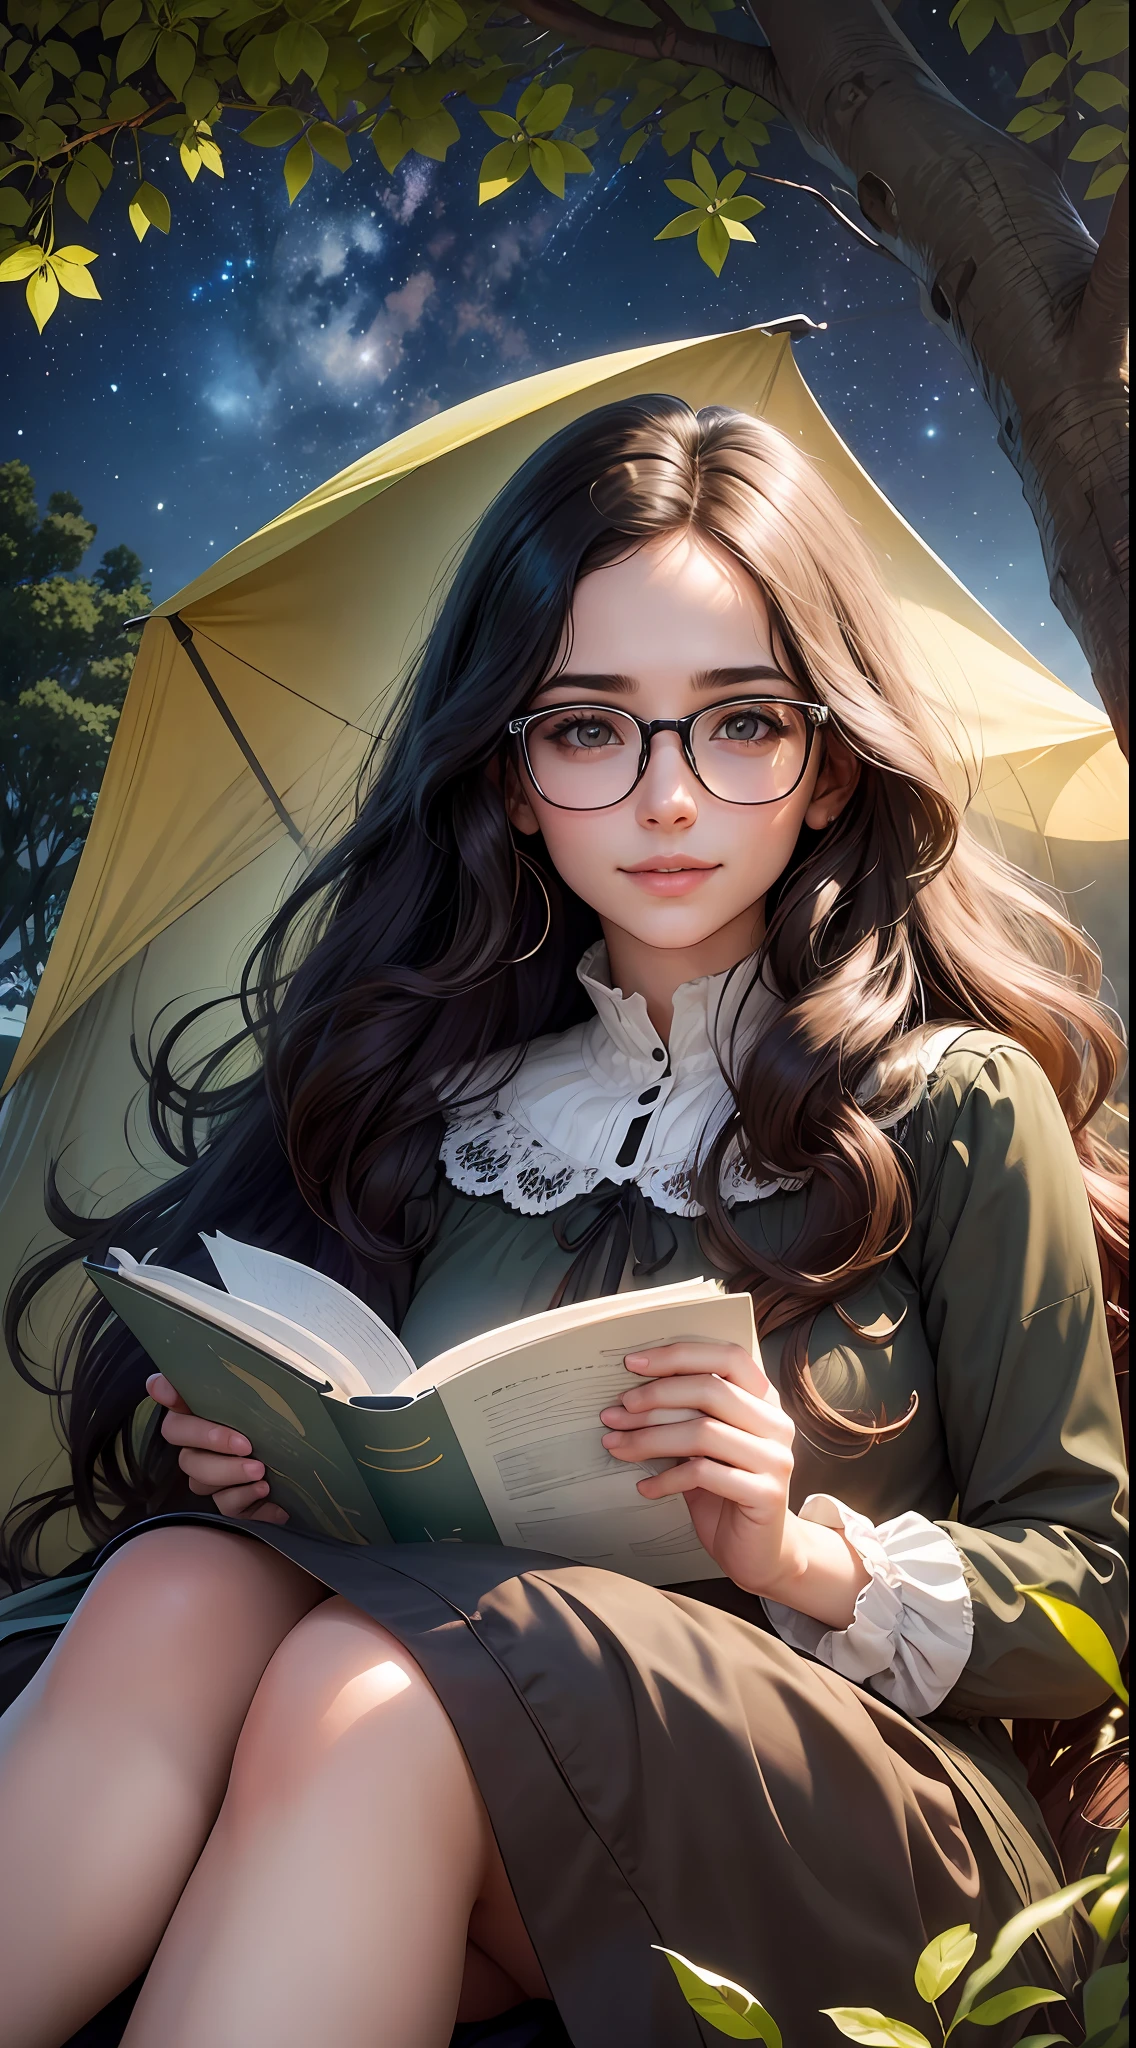 Young woman sitting on the grass reading a book, long black curly hair, wearing glasses, delicate smile, bright brown eyes, looking up at the sky, lamp light, whole body, under a huge tree, farther view, a tent in the background, starry sky, illuminated night, photographic effect, 8k, super detailed, hyper realistic.